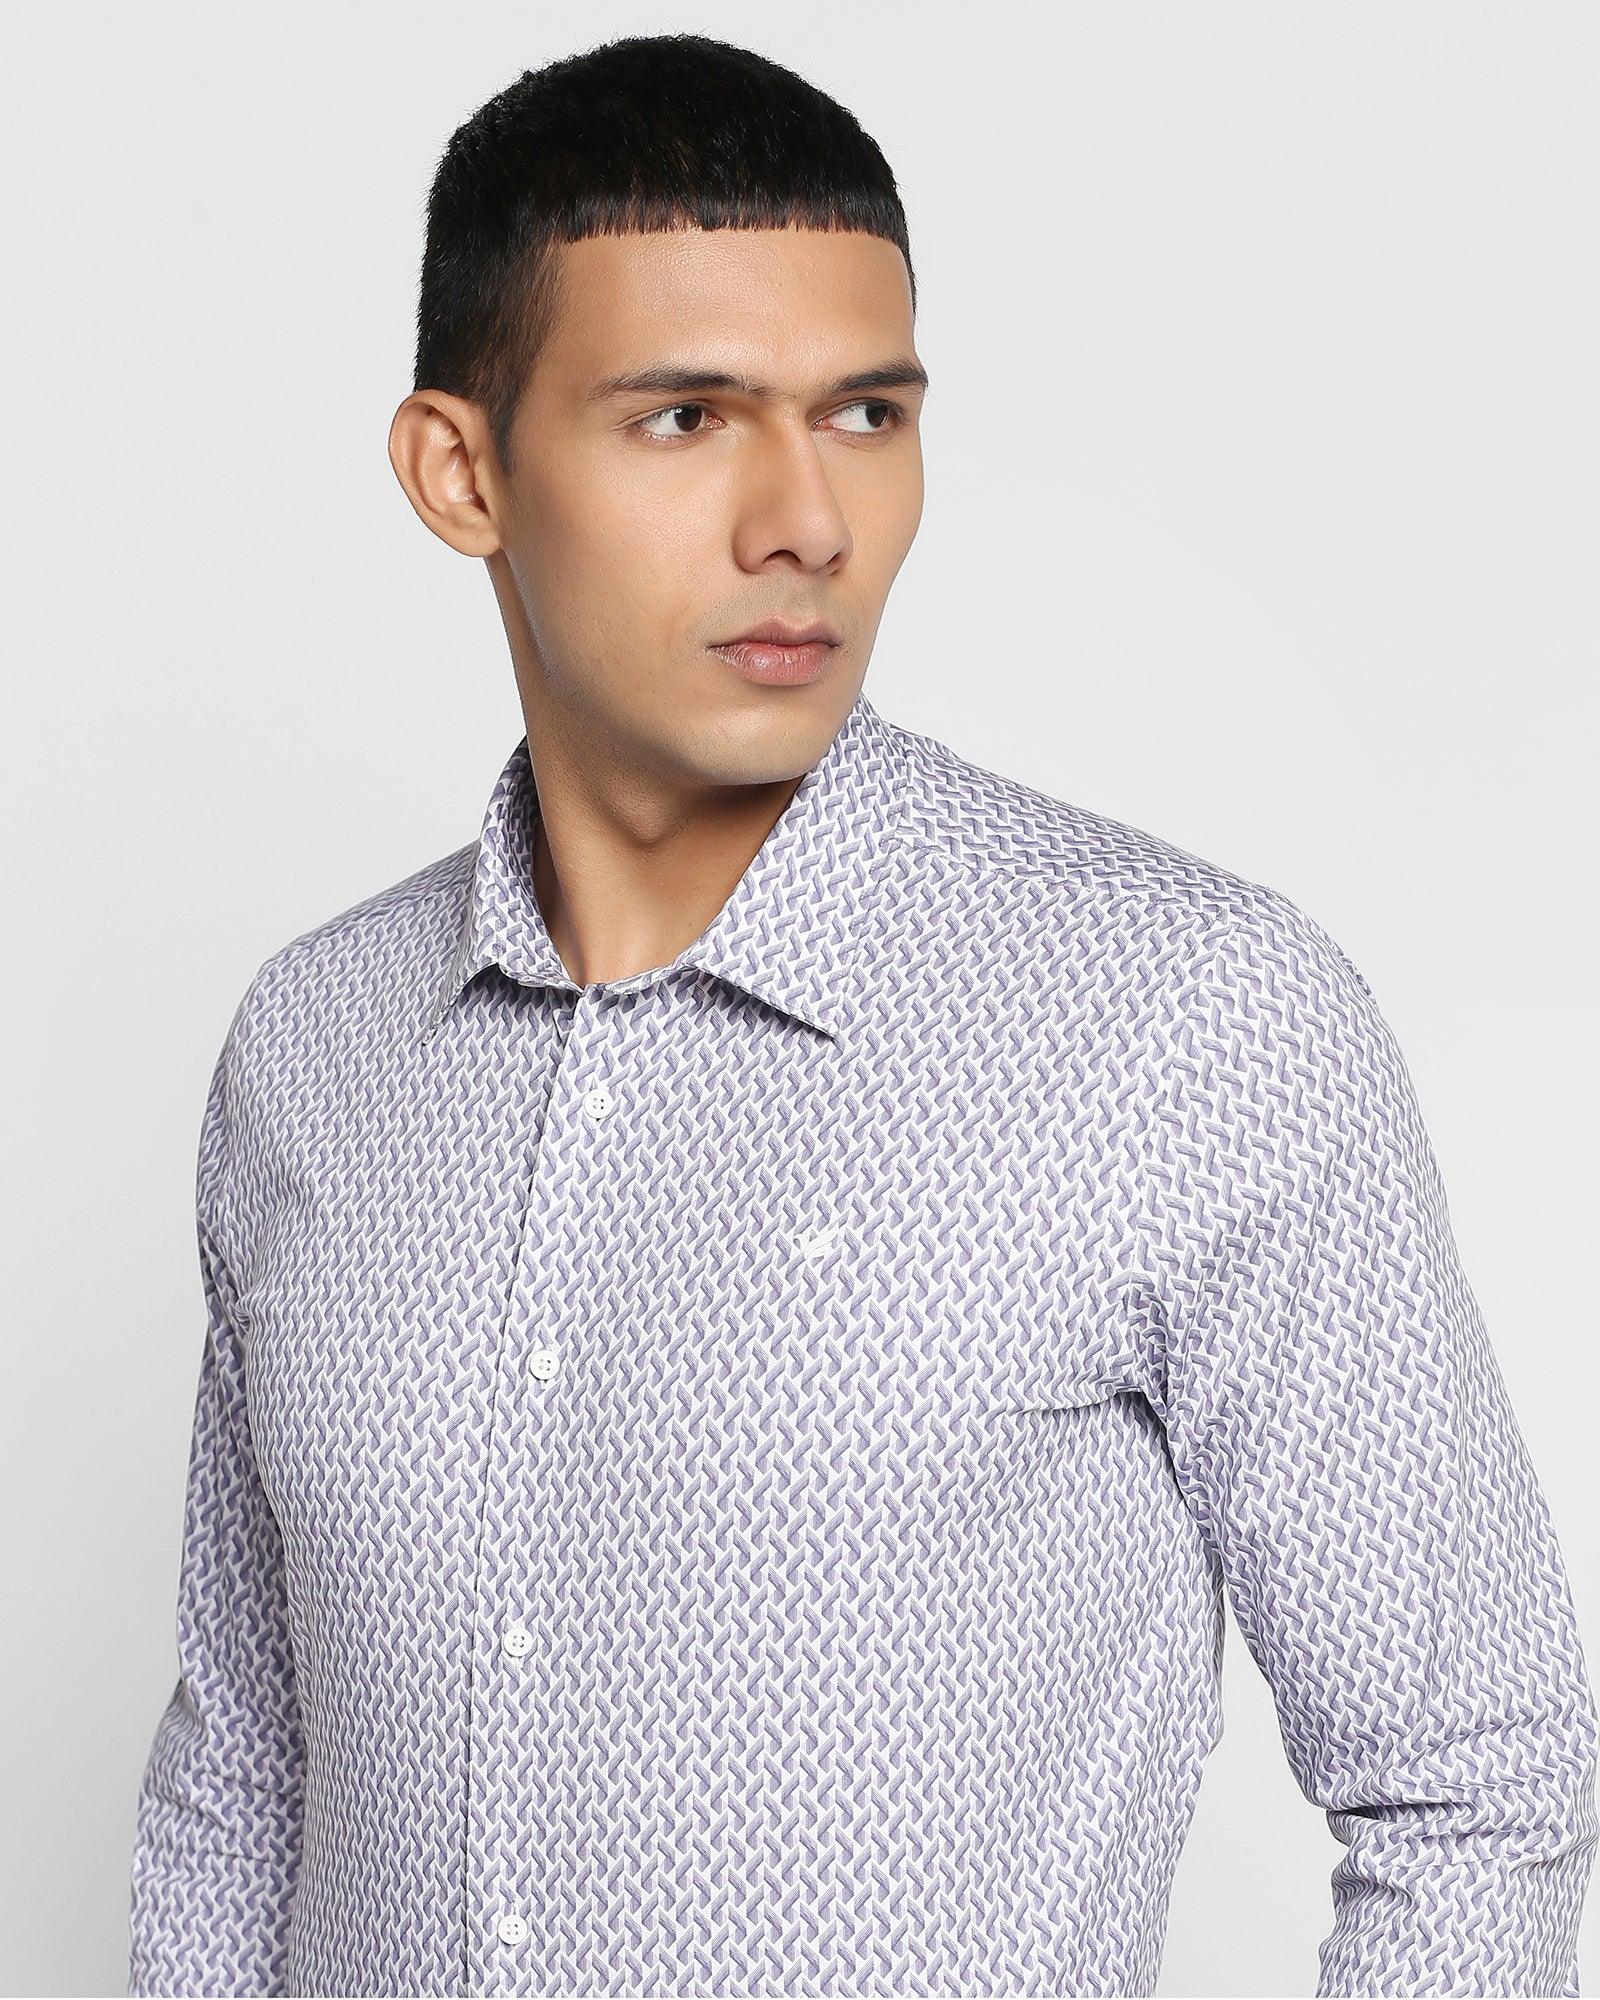 TechPro Formal Lilac Printed Shirt - Wellinger